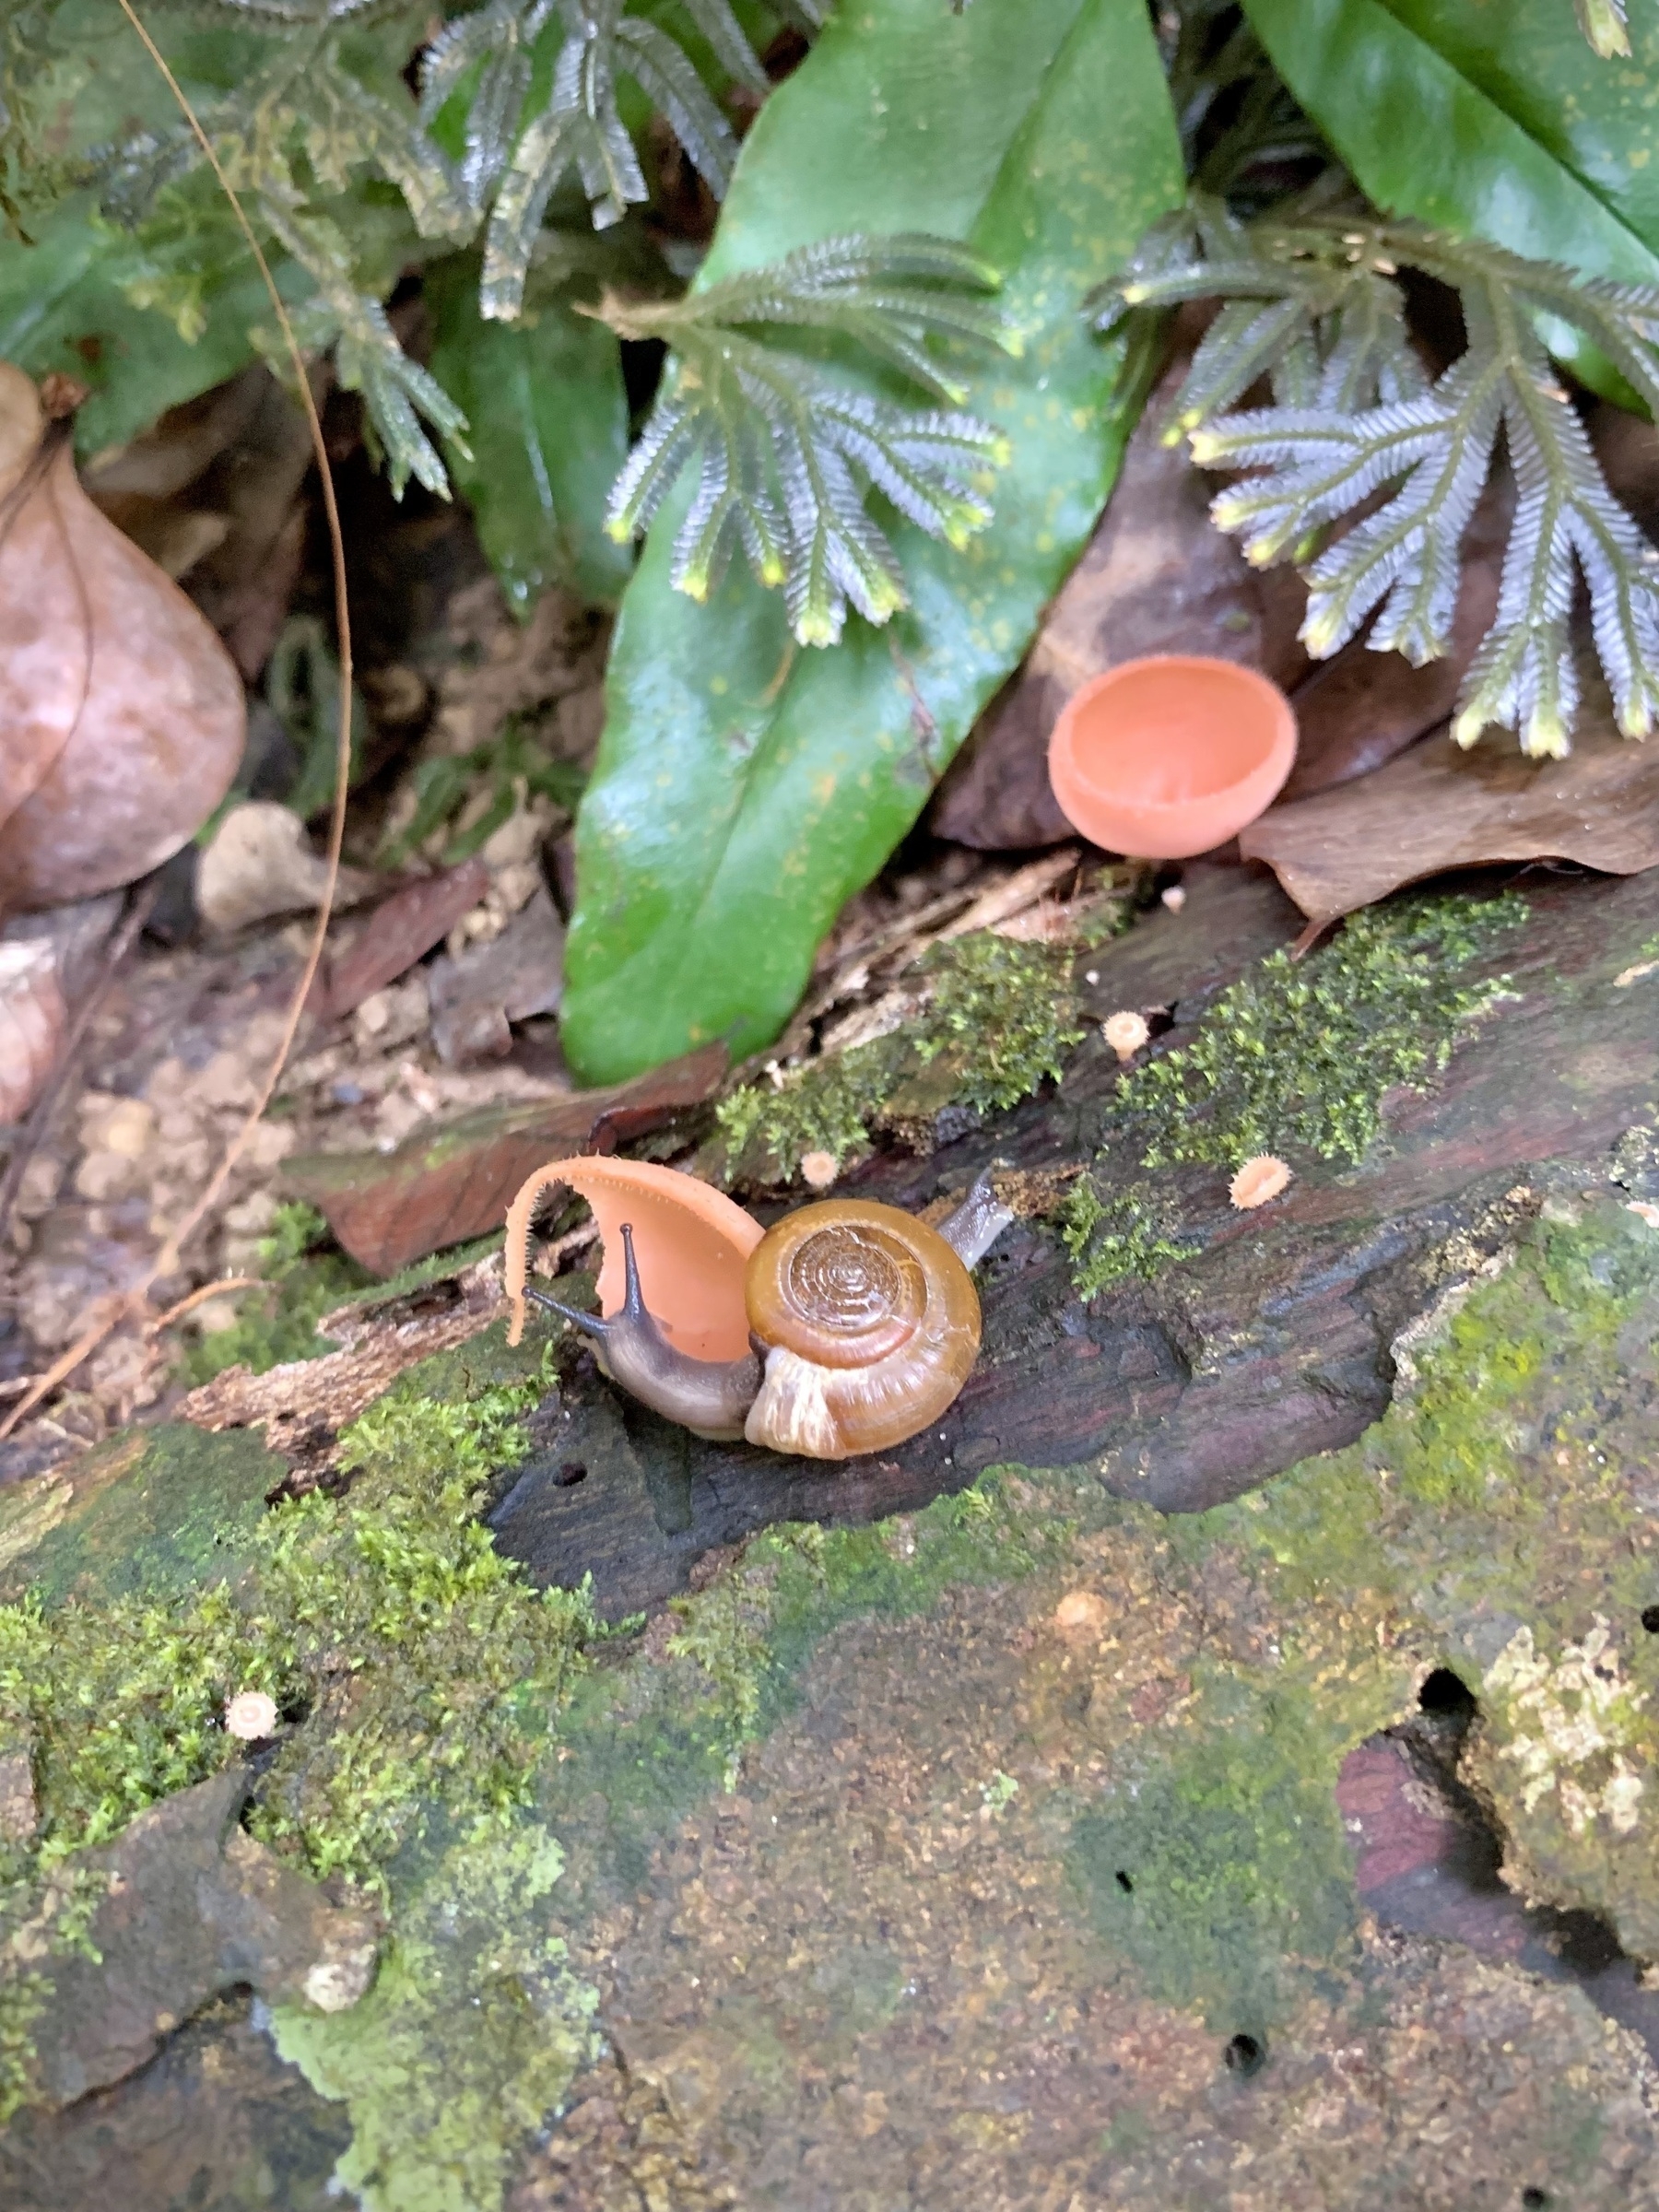 A snail is on a piece of log, eating a mushroom growing on the log